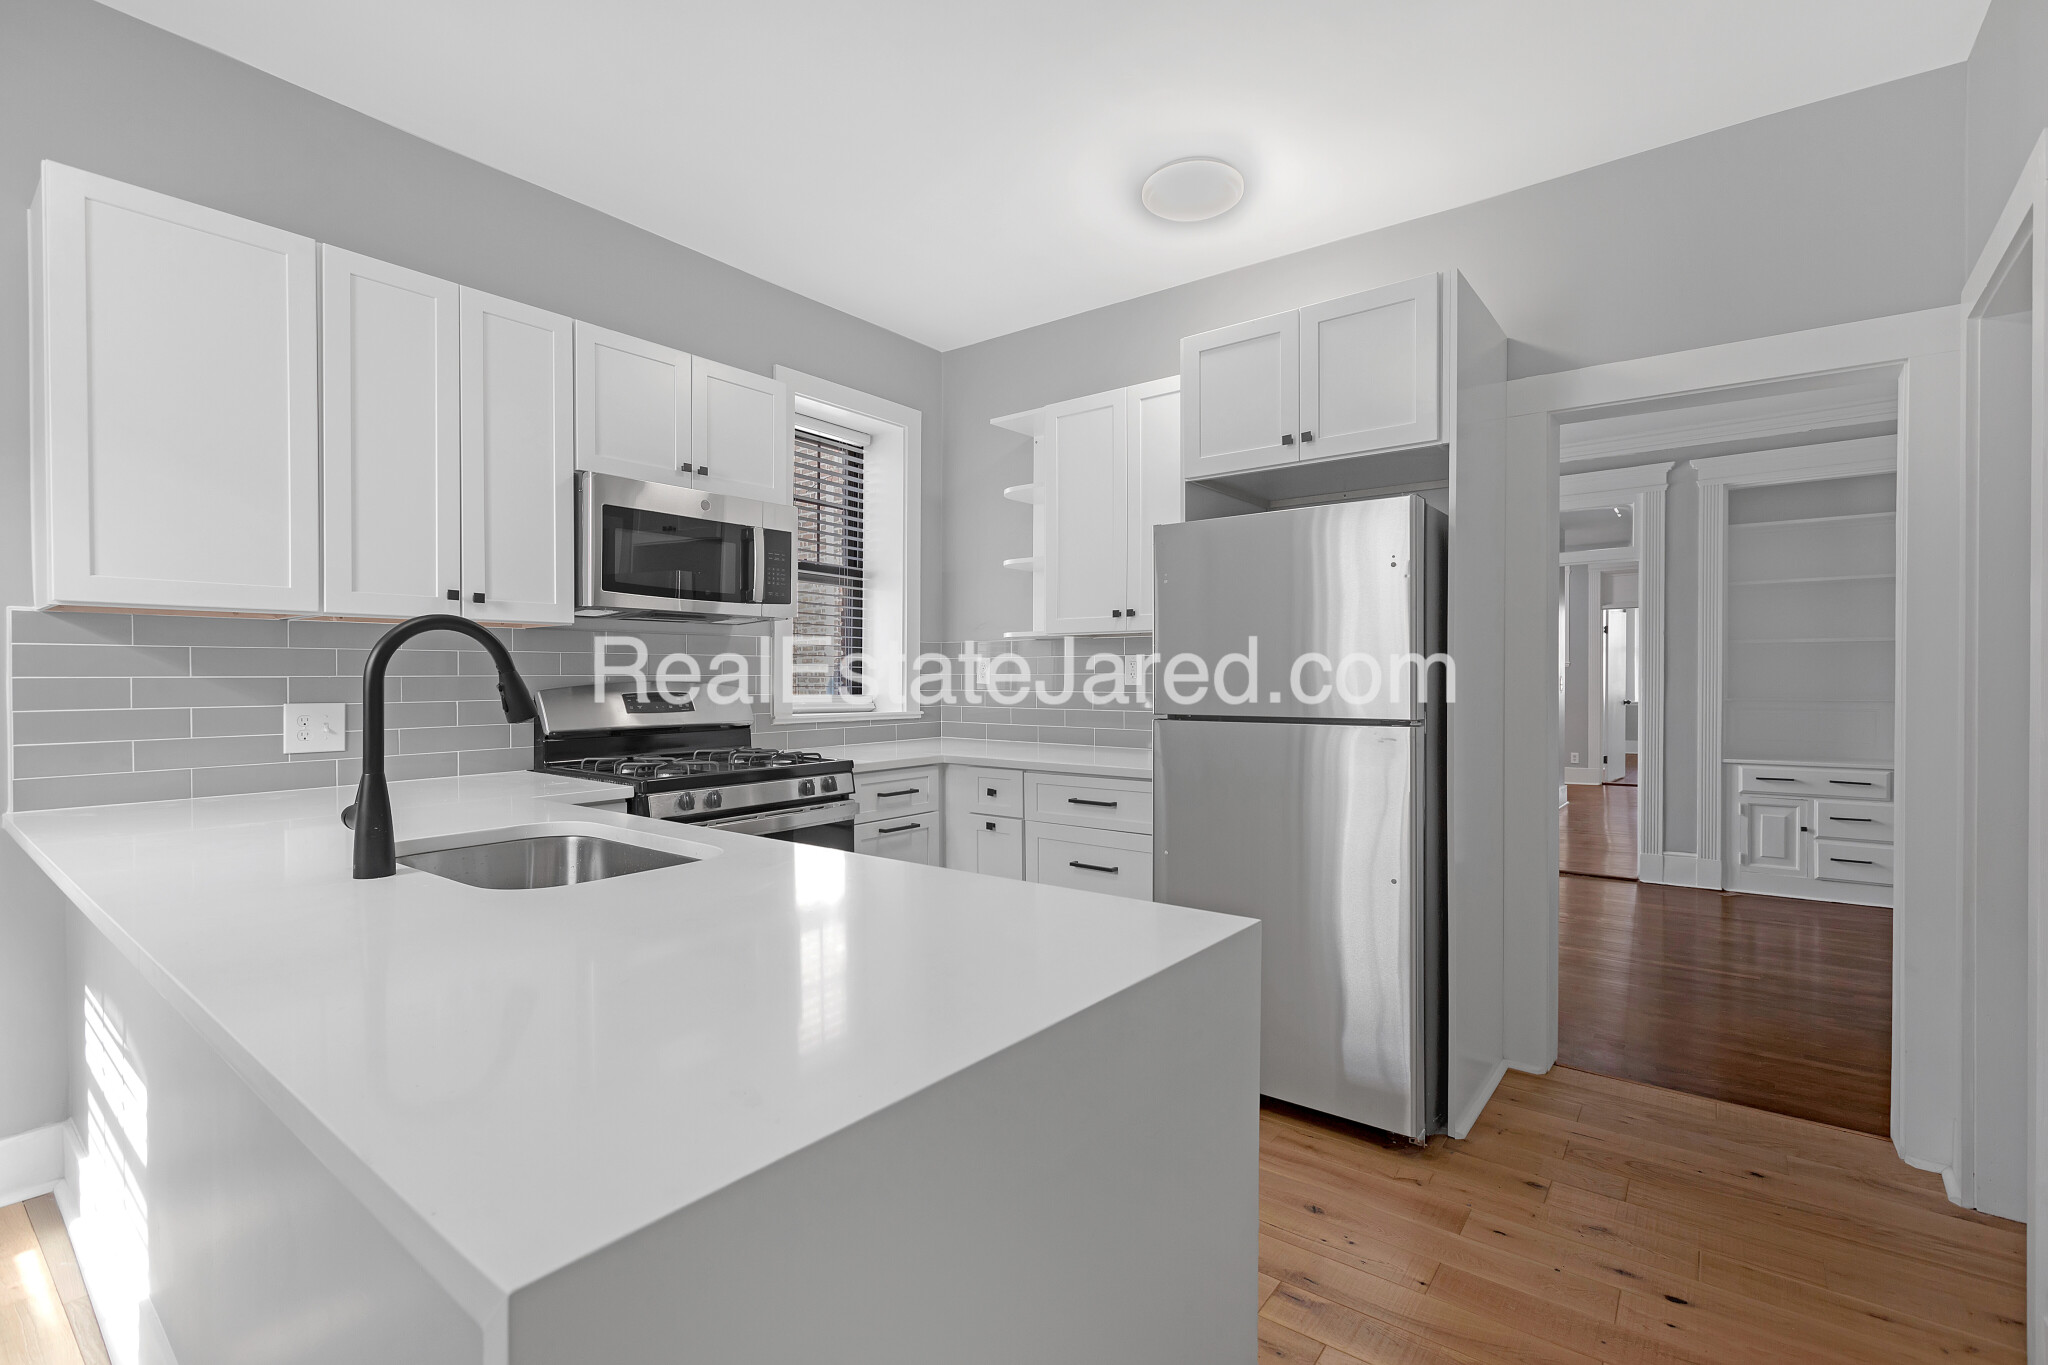 Photos of apartment on Mnsfield St.,Boston MA 02134